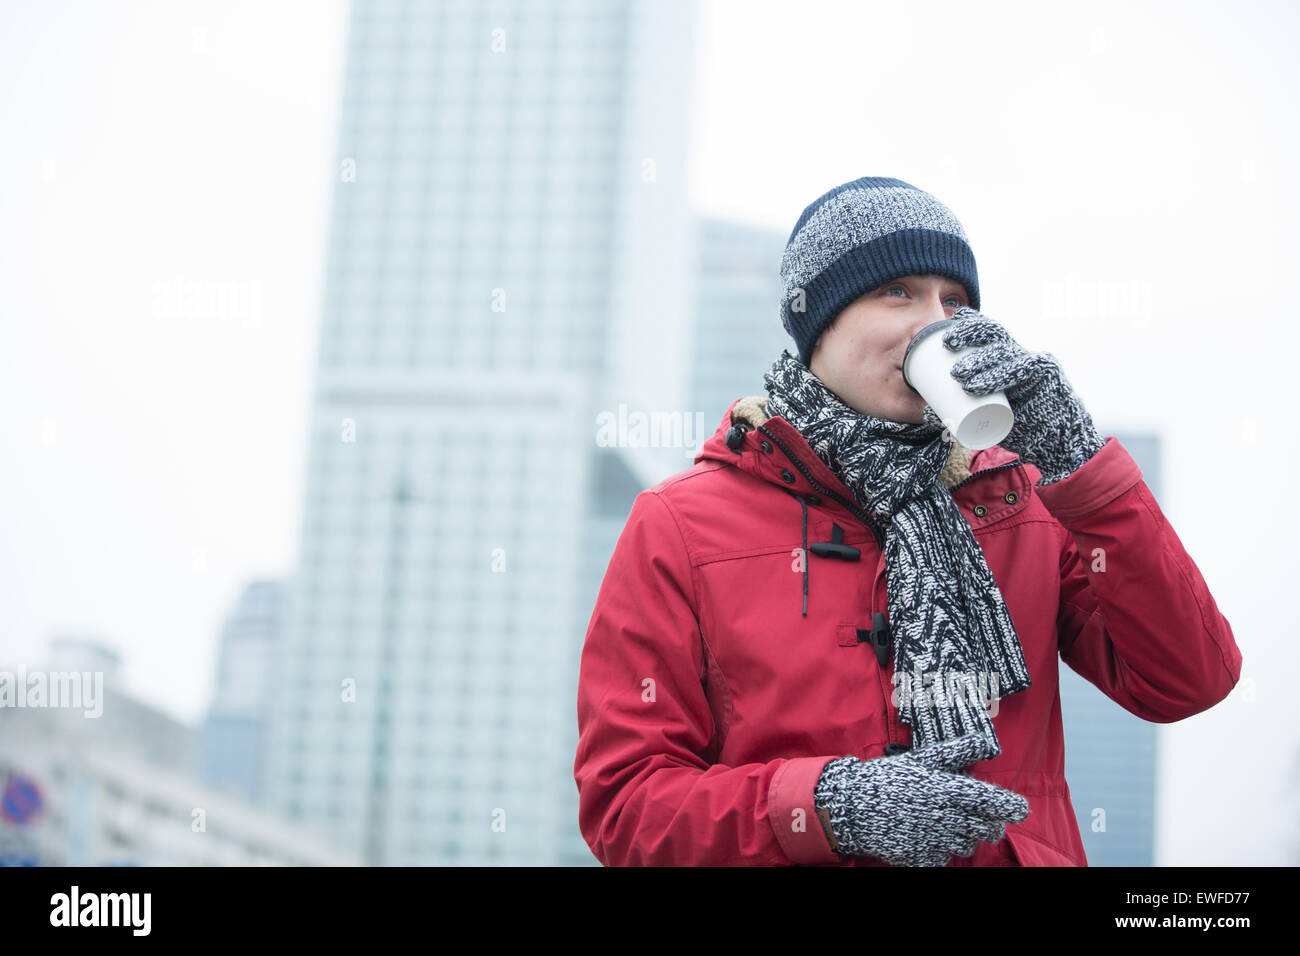 Man in warm clothing drinking coffee outdoors Stock Photo